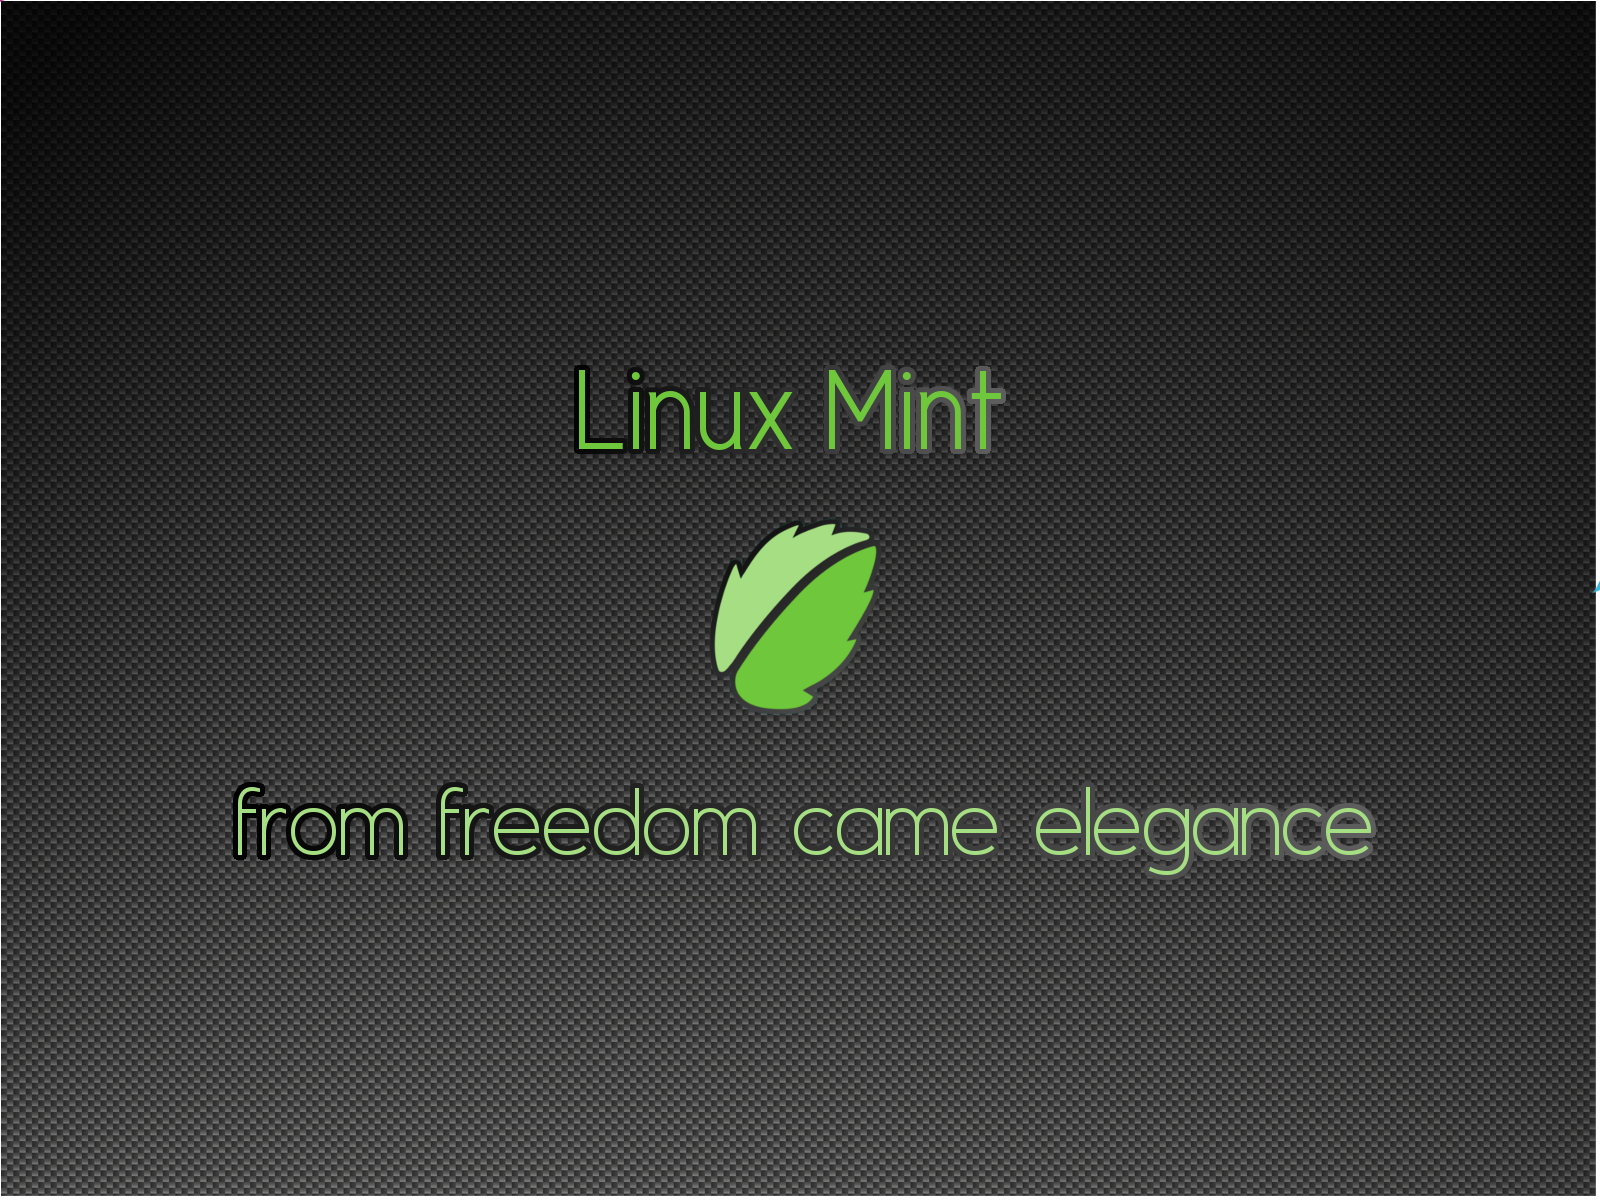 New Wallpaper Minty Carbone Linux Mint Forums